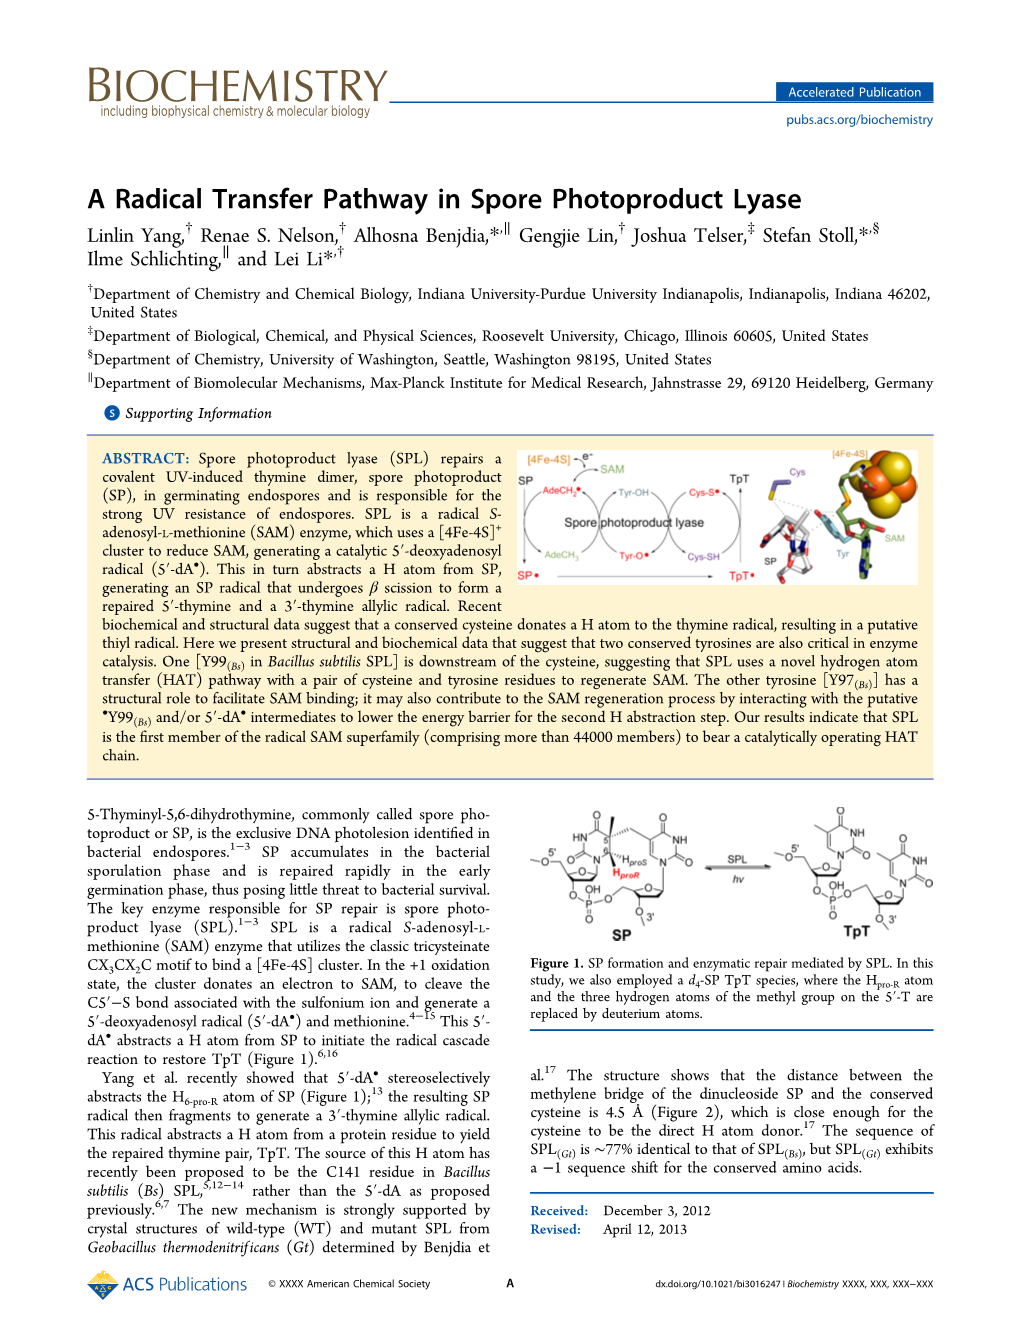 A Radical Transfer Pathway in Spore Photoproduct Lyase † † ∥ † ‡ § Linlin Yang, Renae S